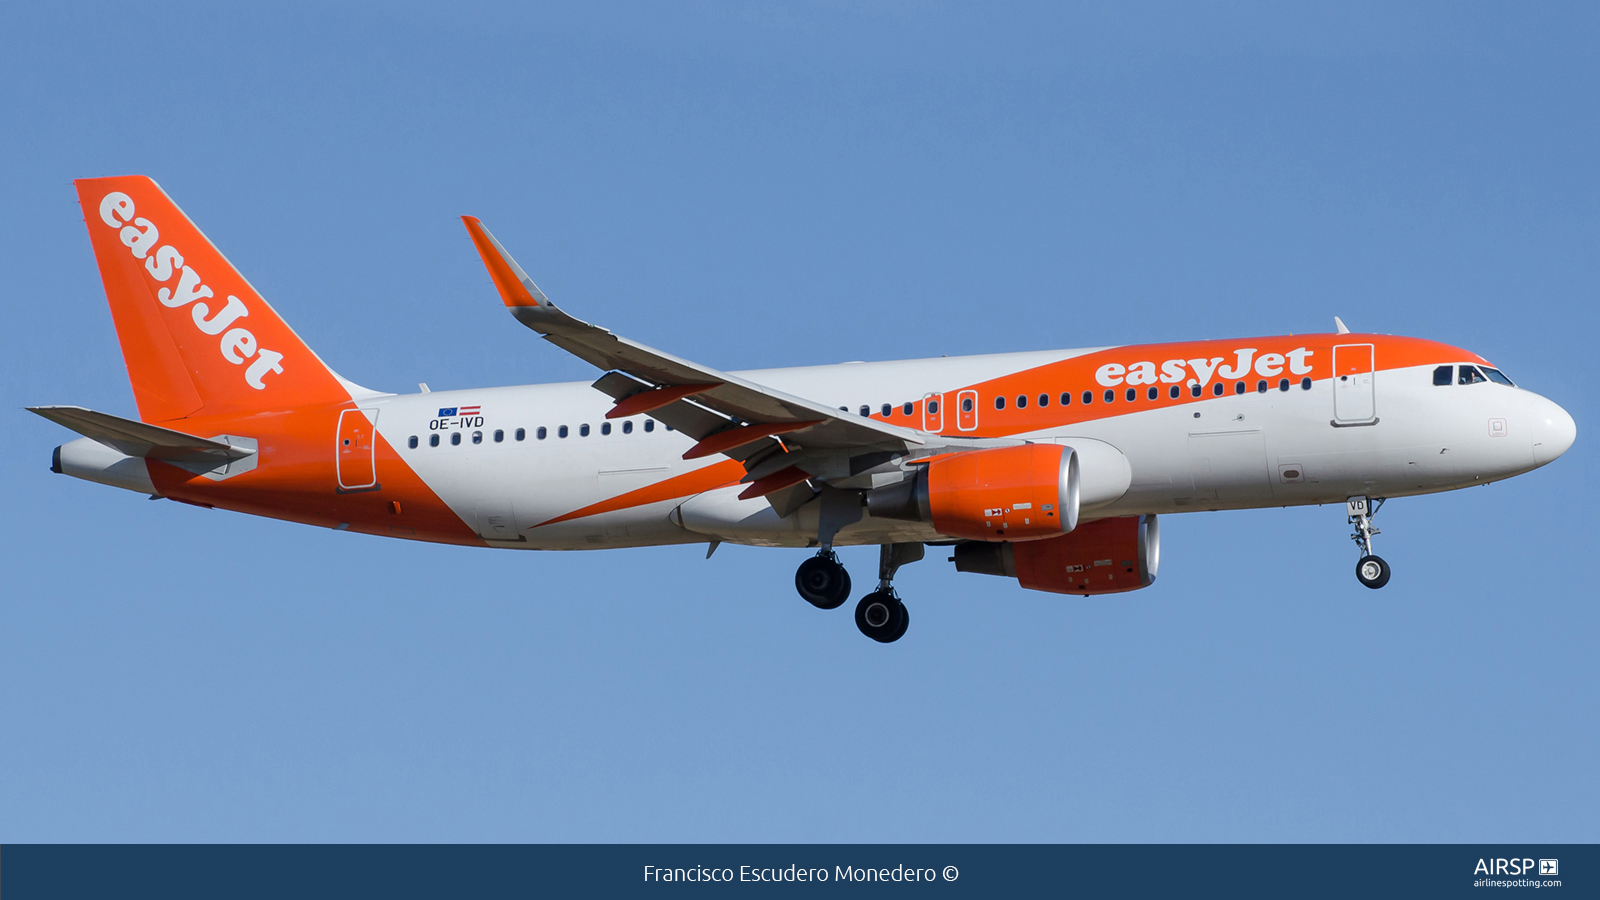 Easyjet  Airbus A320  OE-IVD